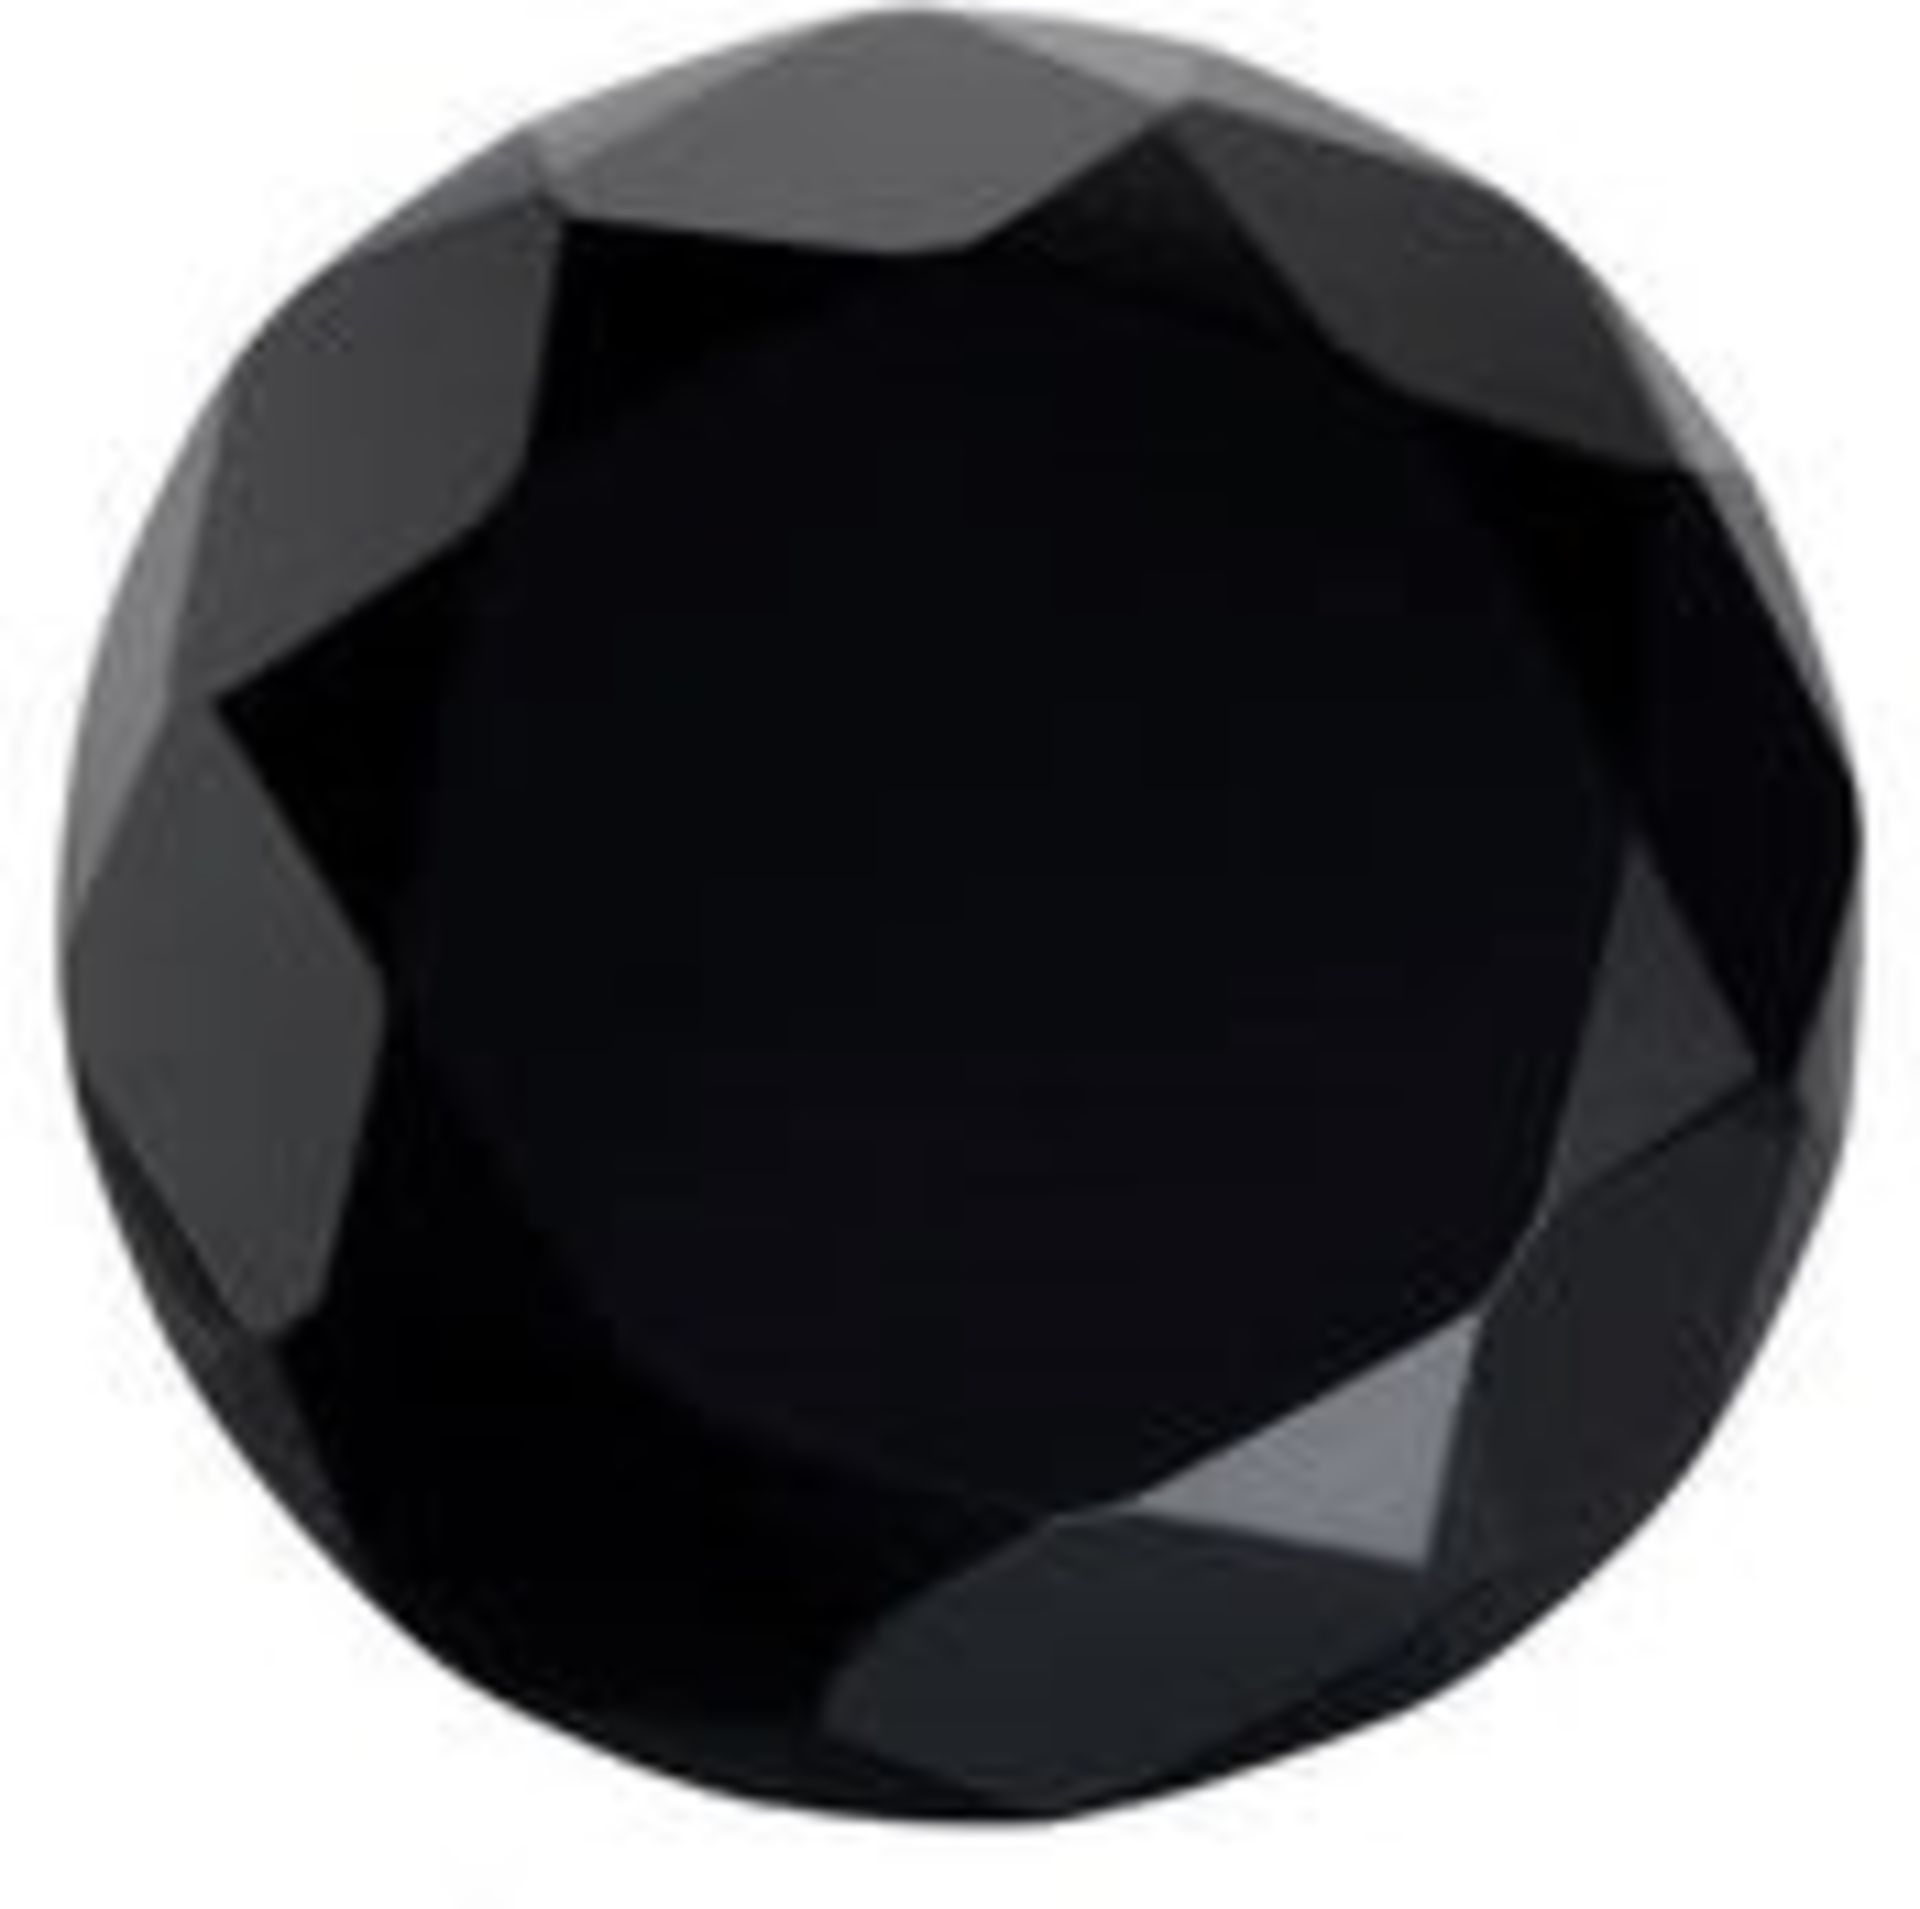 10 x ICE London Diamond Shaped Crystal Paperweights - Colour: Black - 100mm In Diameter - New & - Image 2 of 4